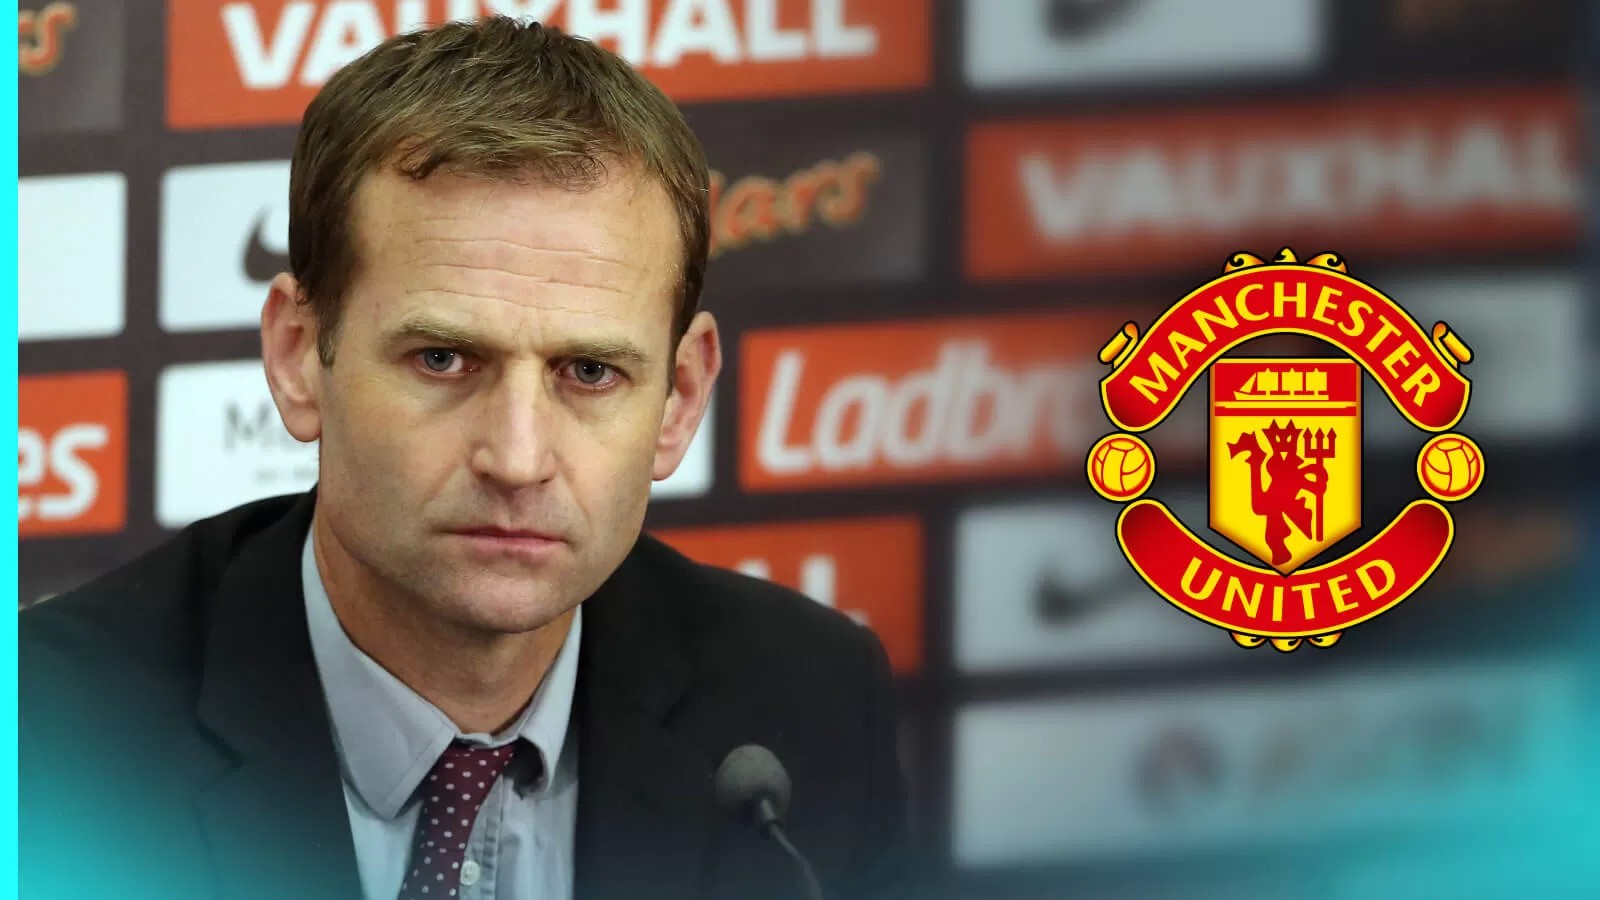 Dan Ashworth acts to ‘facilitate Man Utd move’ with ‘third party’ to ‘break impasse’ with Newcastle